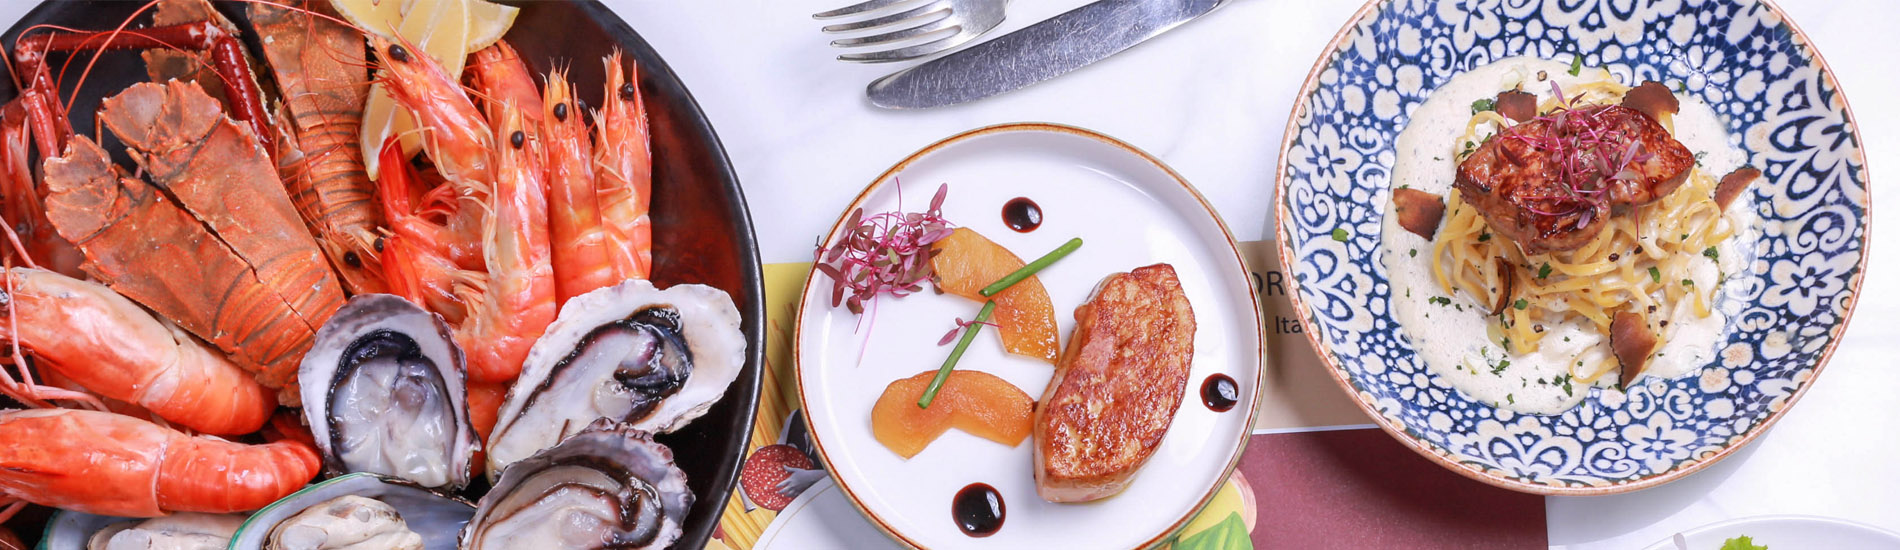 Try All-New Duck or Foie gras at Ventisi Restaurant, Centara Grand